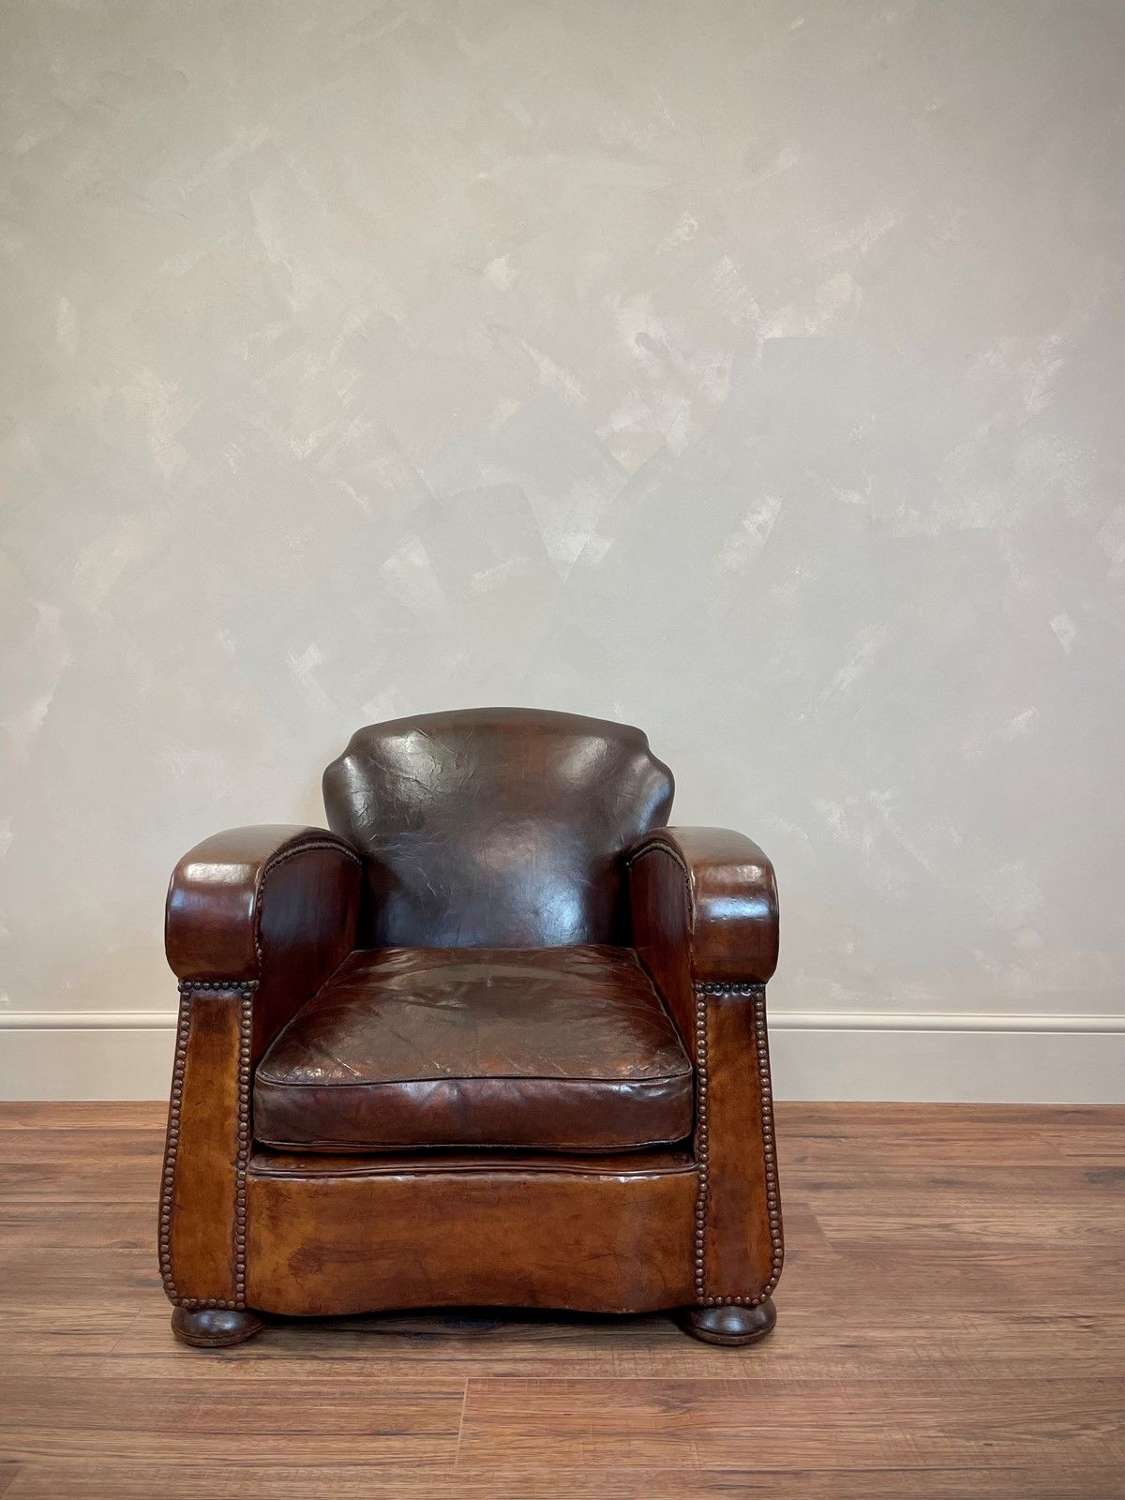 Deco period French leather club chair